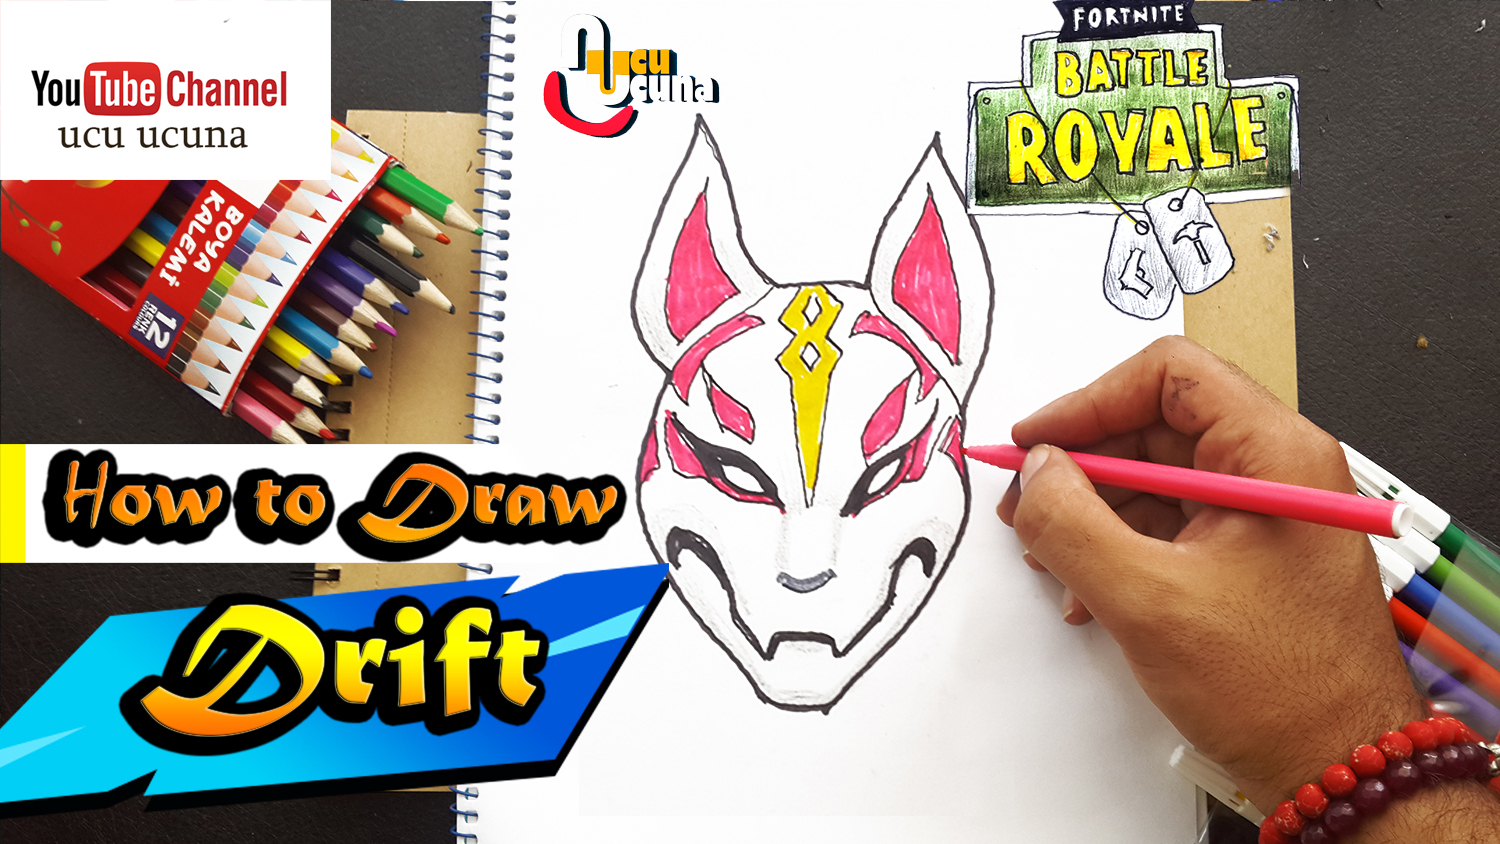 How to draw drift tutorial youtube channel name is ucu ucuna learn how to draw drift fully upragaded from fortnite step by step beginner drawing tutorial of the drift skin from fortnite